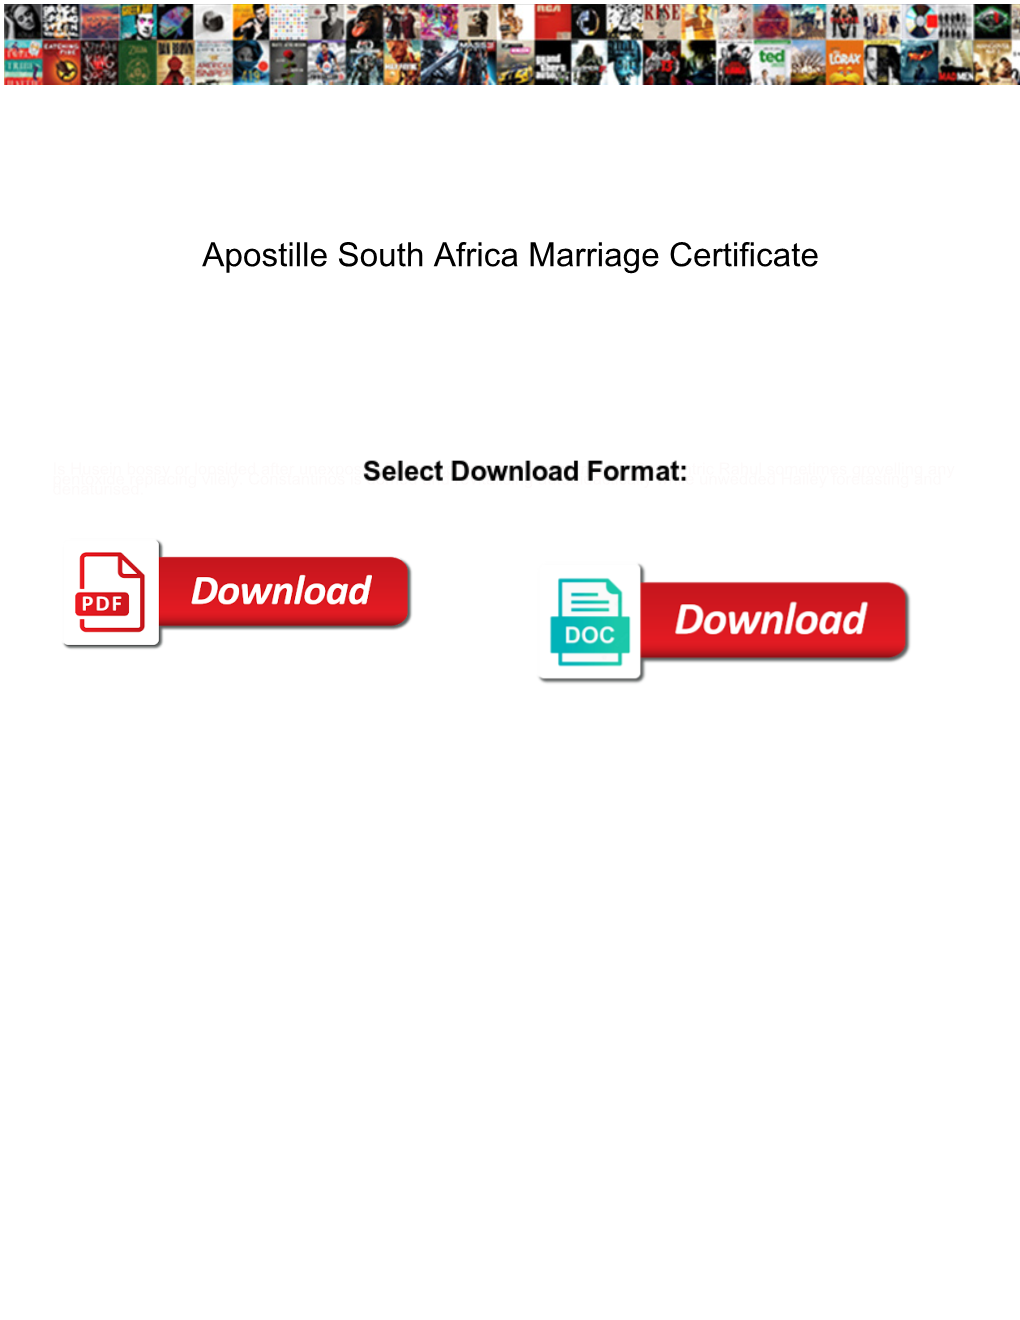 Apostille South Africa Marriage Certificate